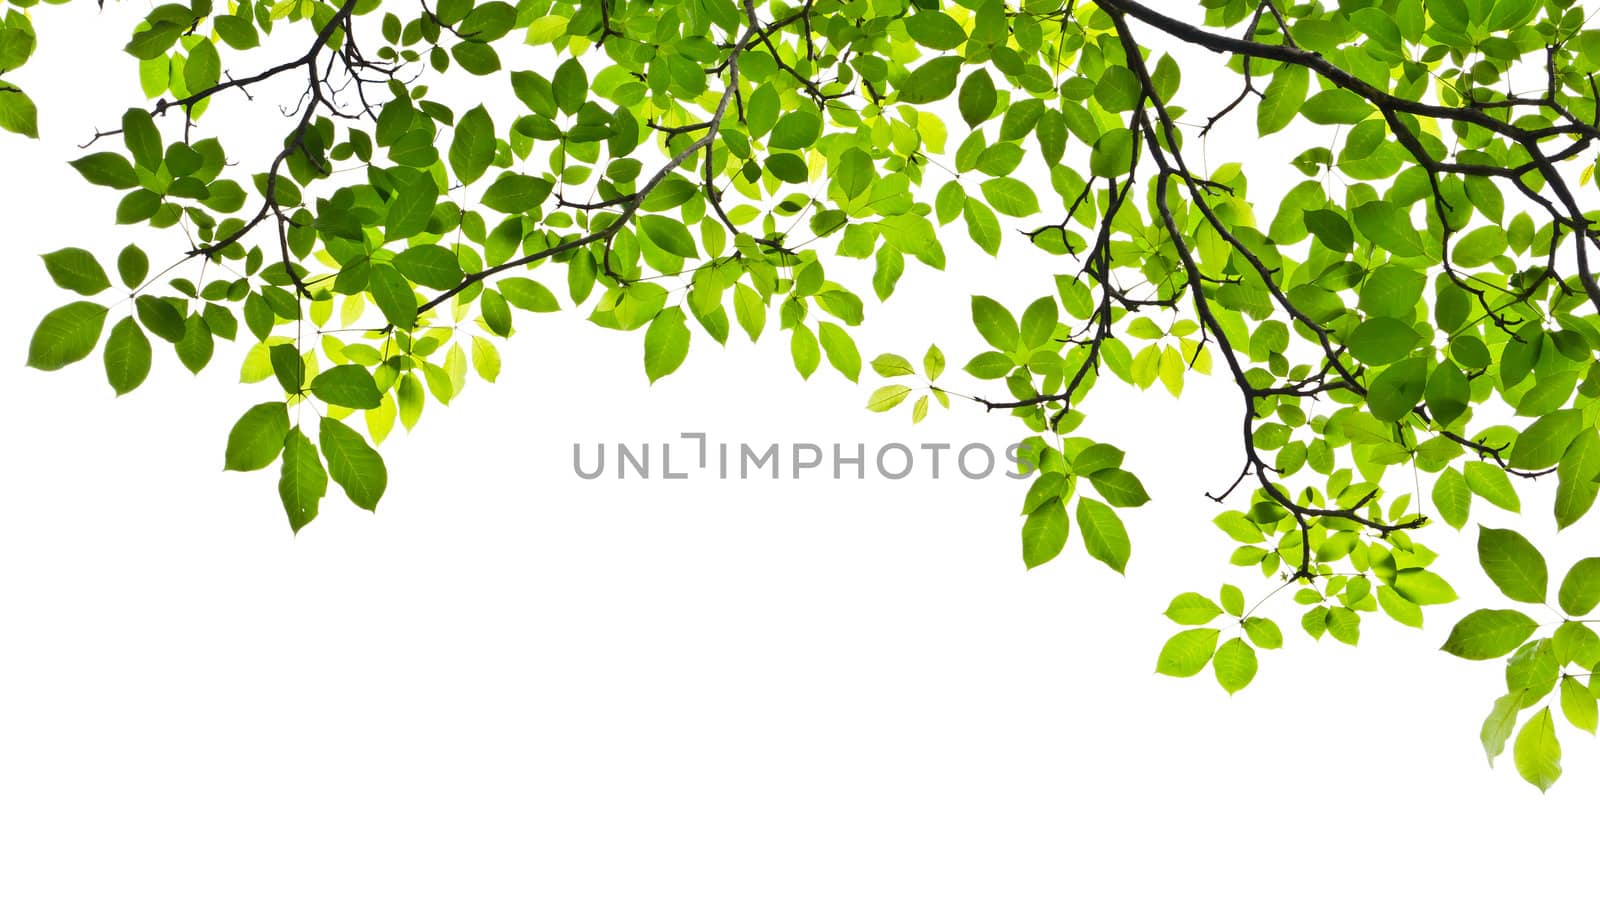 leaf isolated on white background by tungphoto